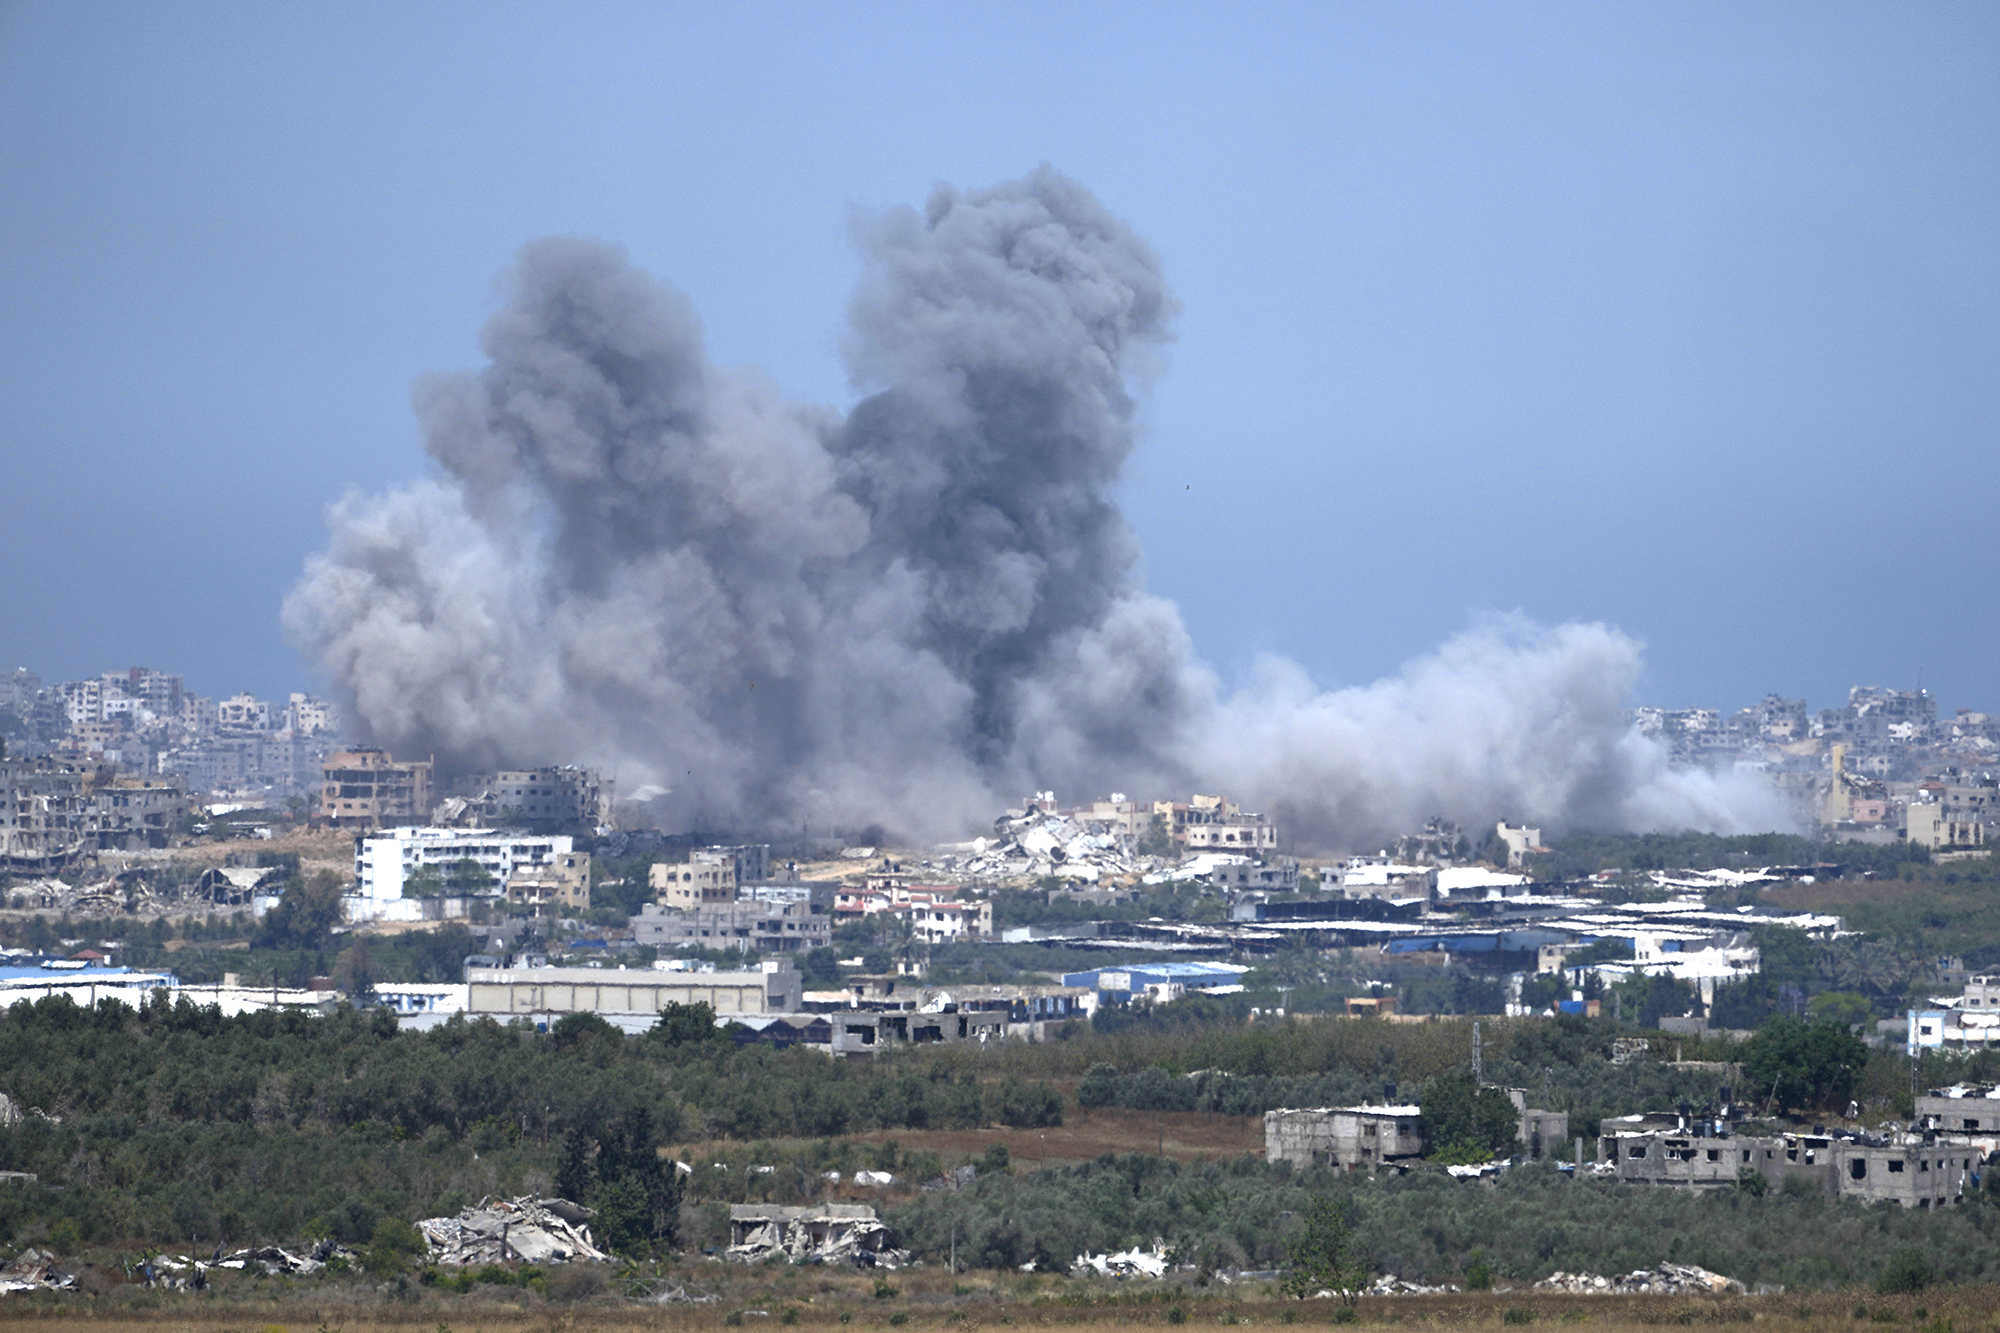 Smoke rises following an Israeli airstrike in Gaza, as seen from southern Israel, on May 17.